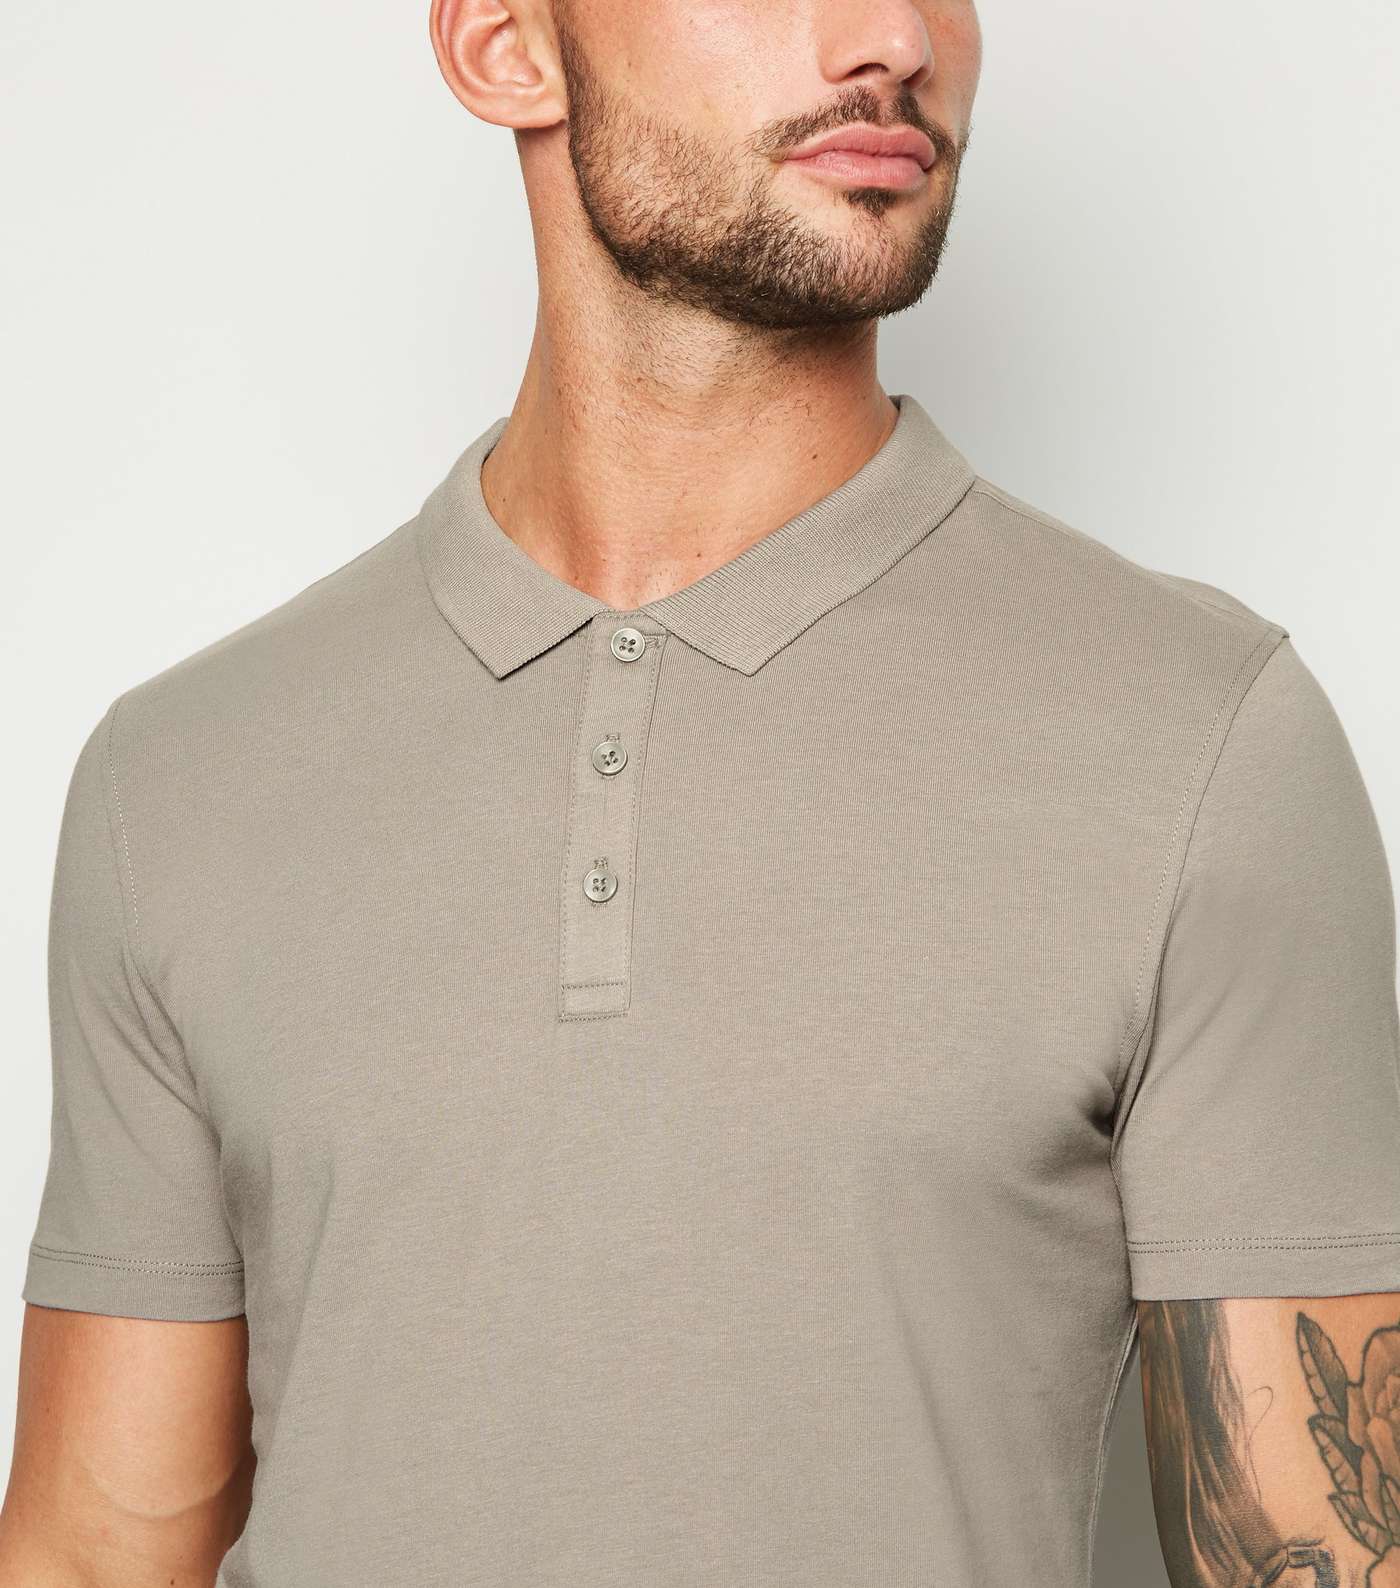 Pale Grey Muscle Fit Polo Shirt Image 5